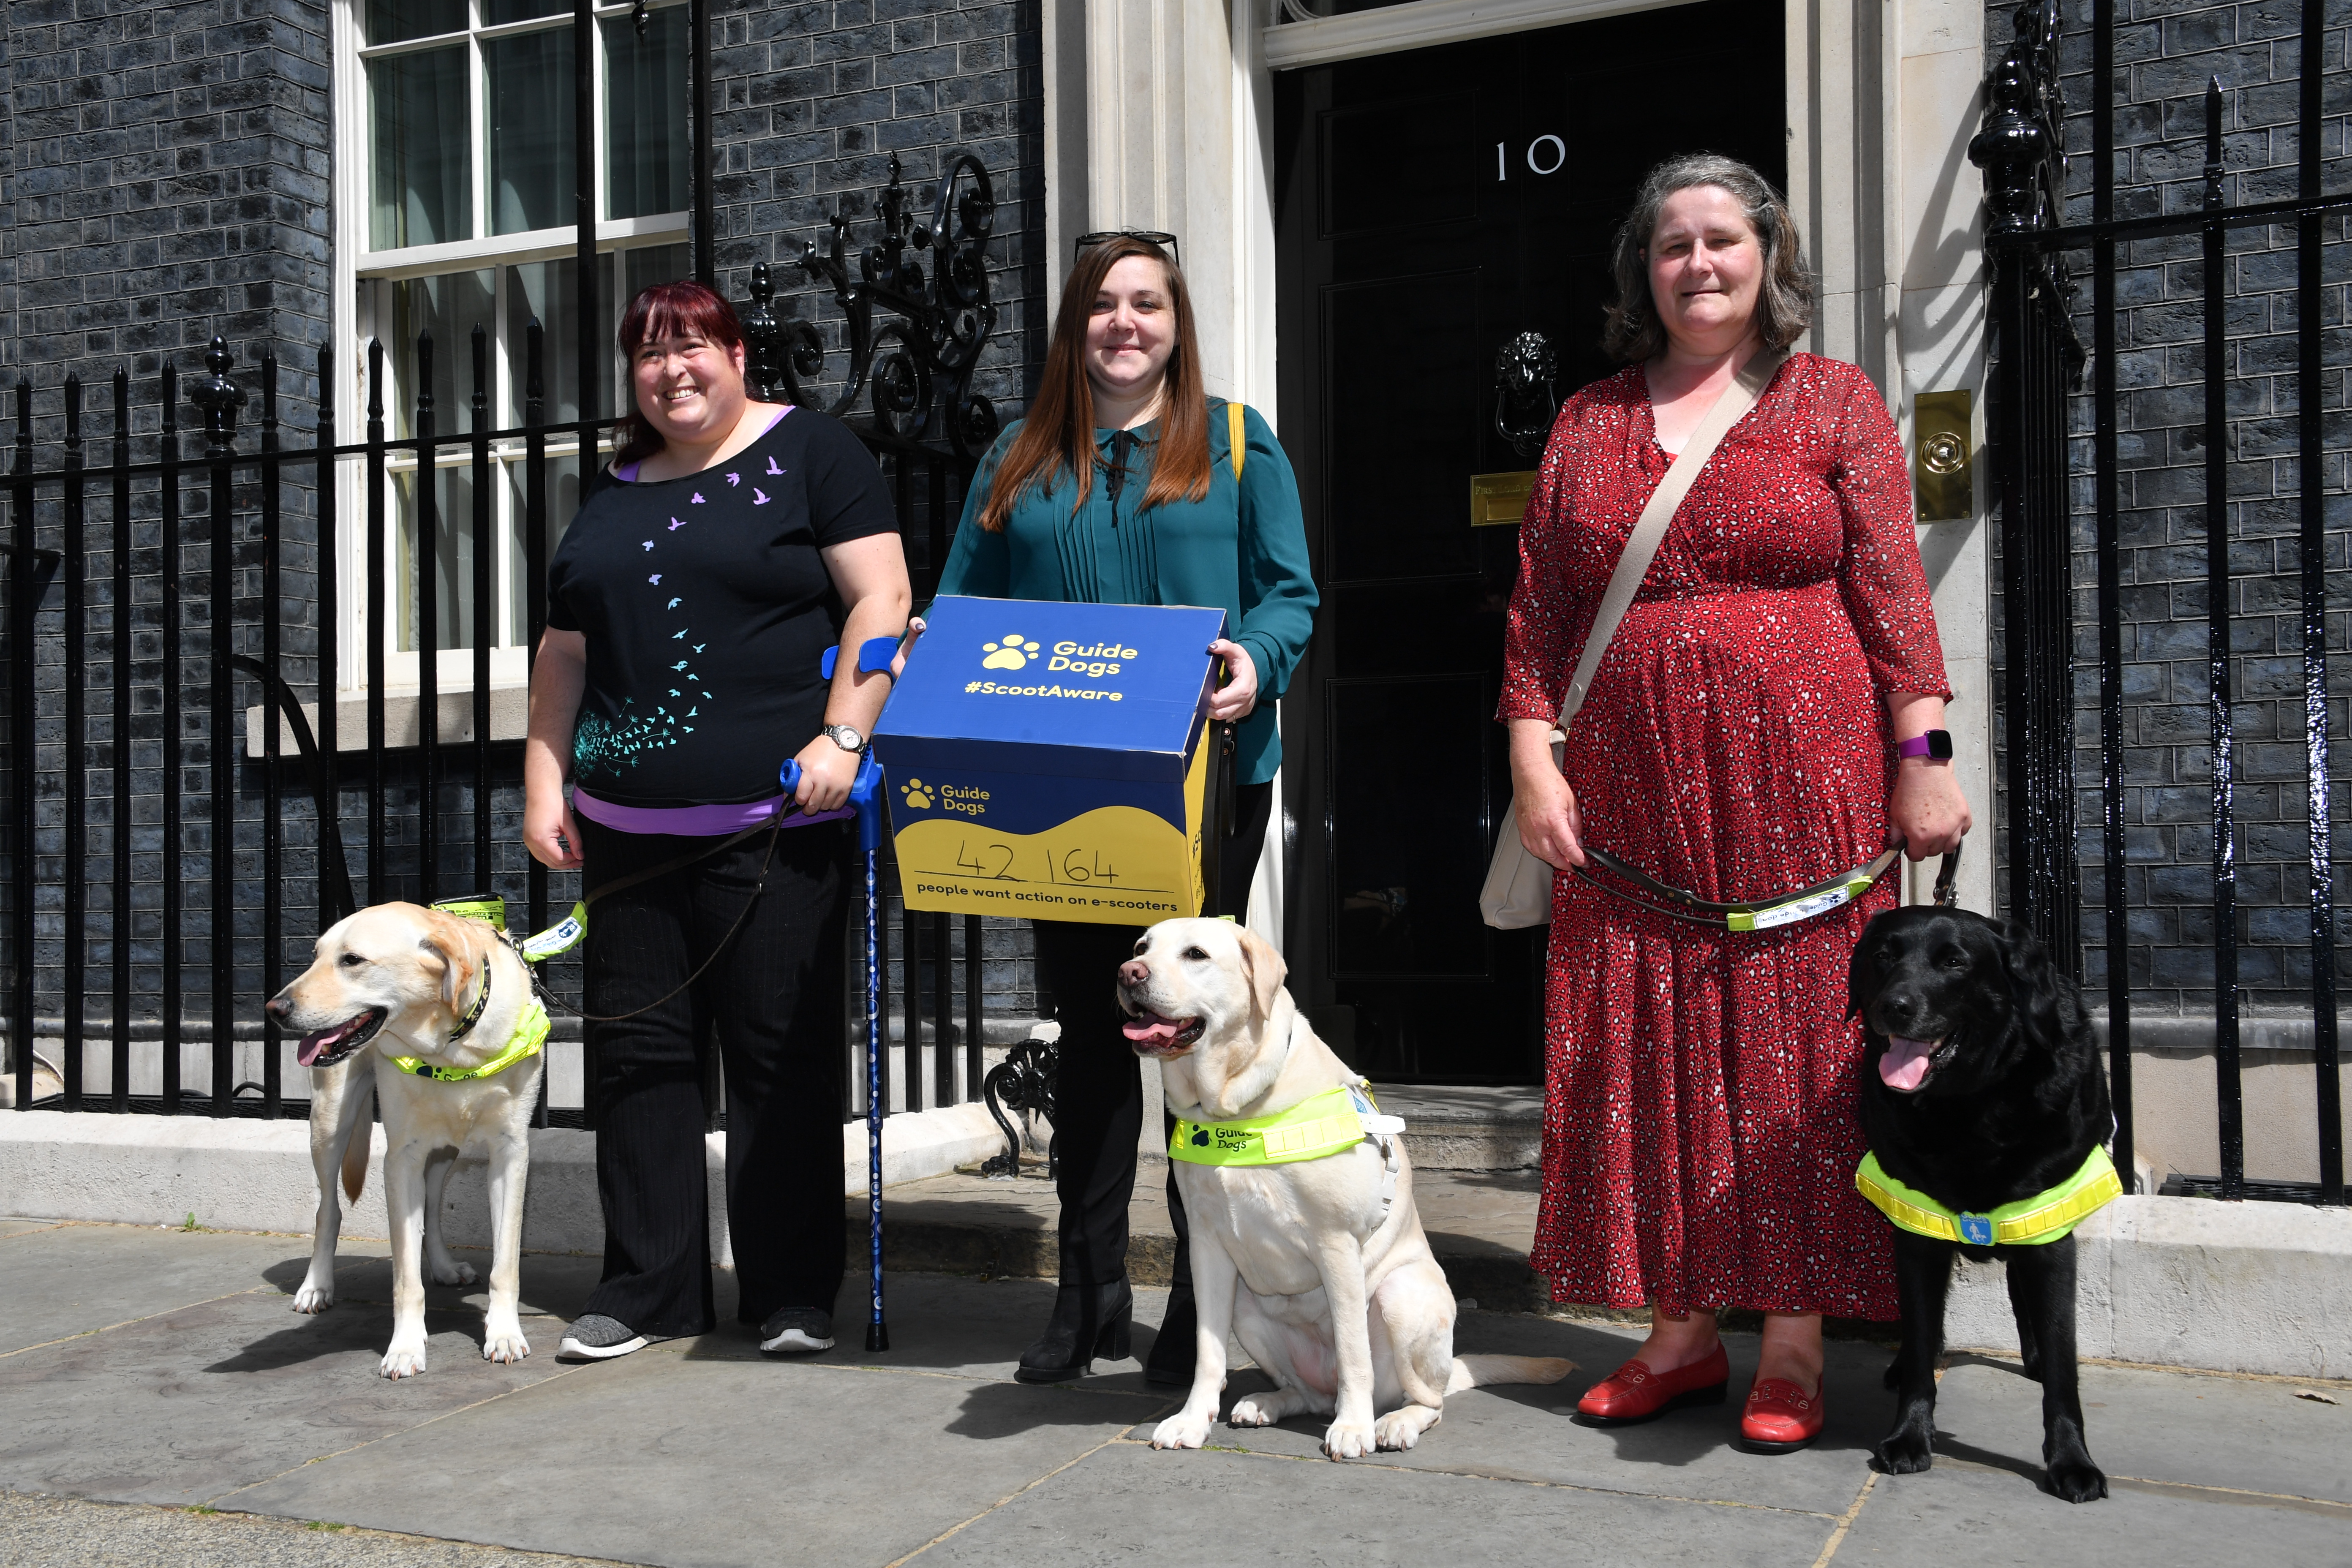 Guide dog owners Laura Drew, Sam Leftwich and Elaine Maries outside No10 with the Guide Dogs e-scooter petition, photographed with guide dogs Jimmy, Lizzie and Inca.